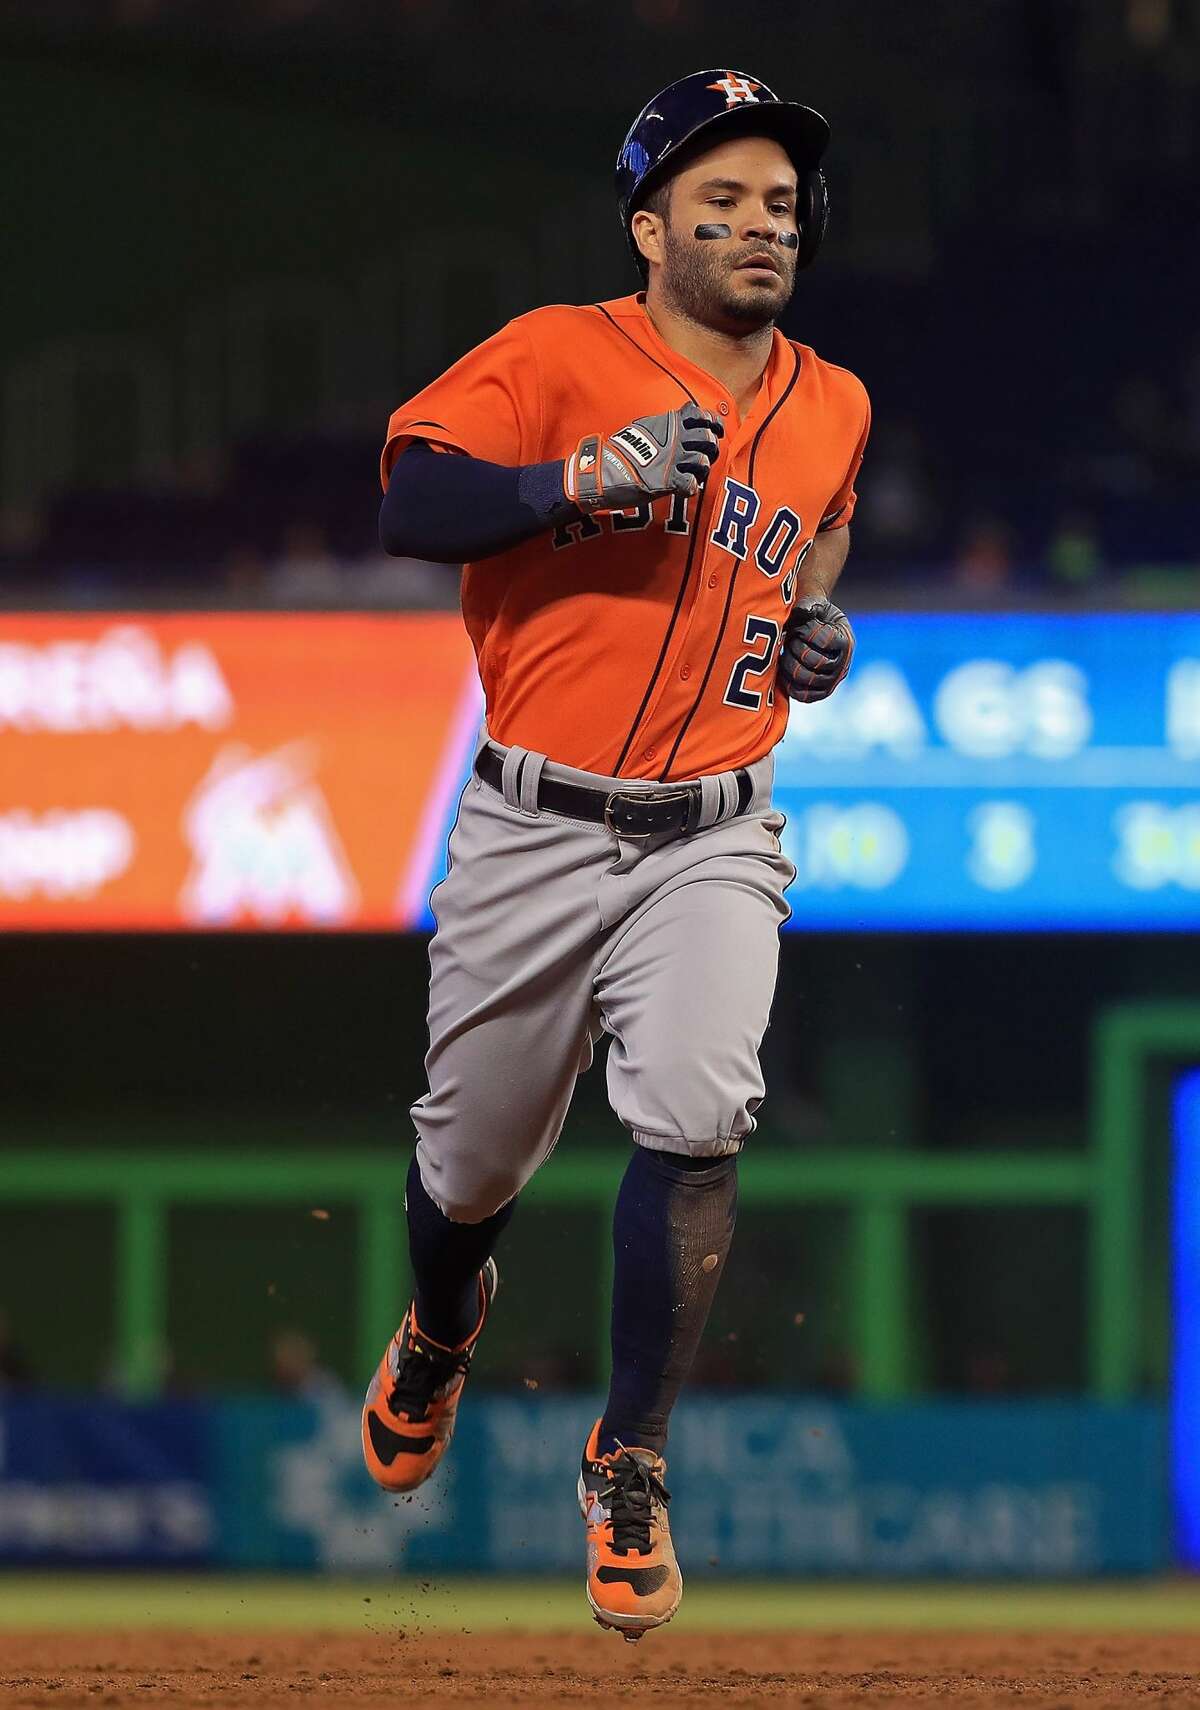 MIAMI, FL - MAY 17: Jose Altuve #27 of the Houston Astros hits a triple in the third inning during a game against the Miami Marlins at Marlins Park on May 17, 2017 in Miami, Florida. (Photo by Mike Ehrmann/Getty Images)